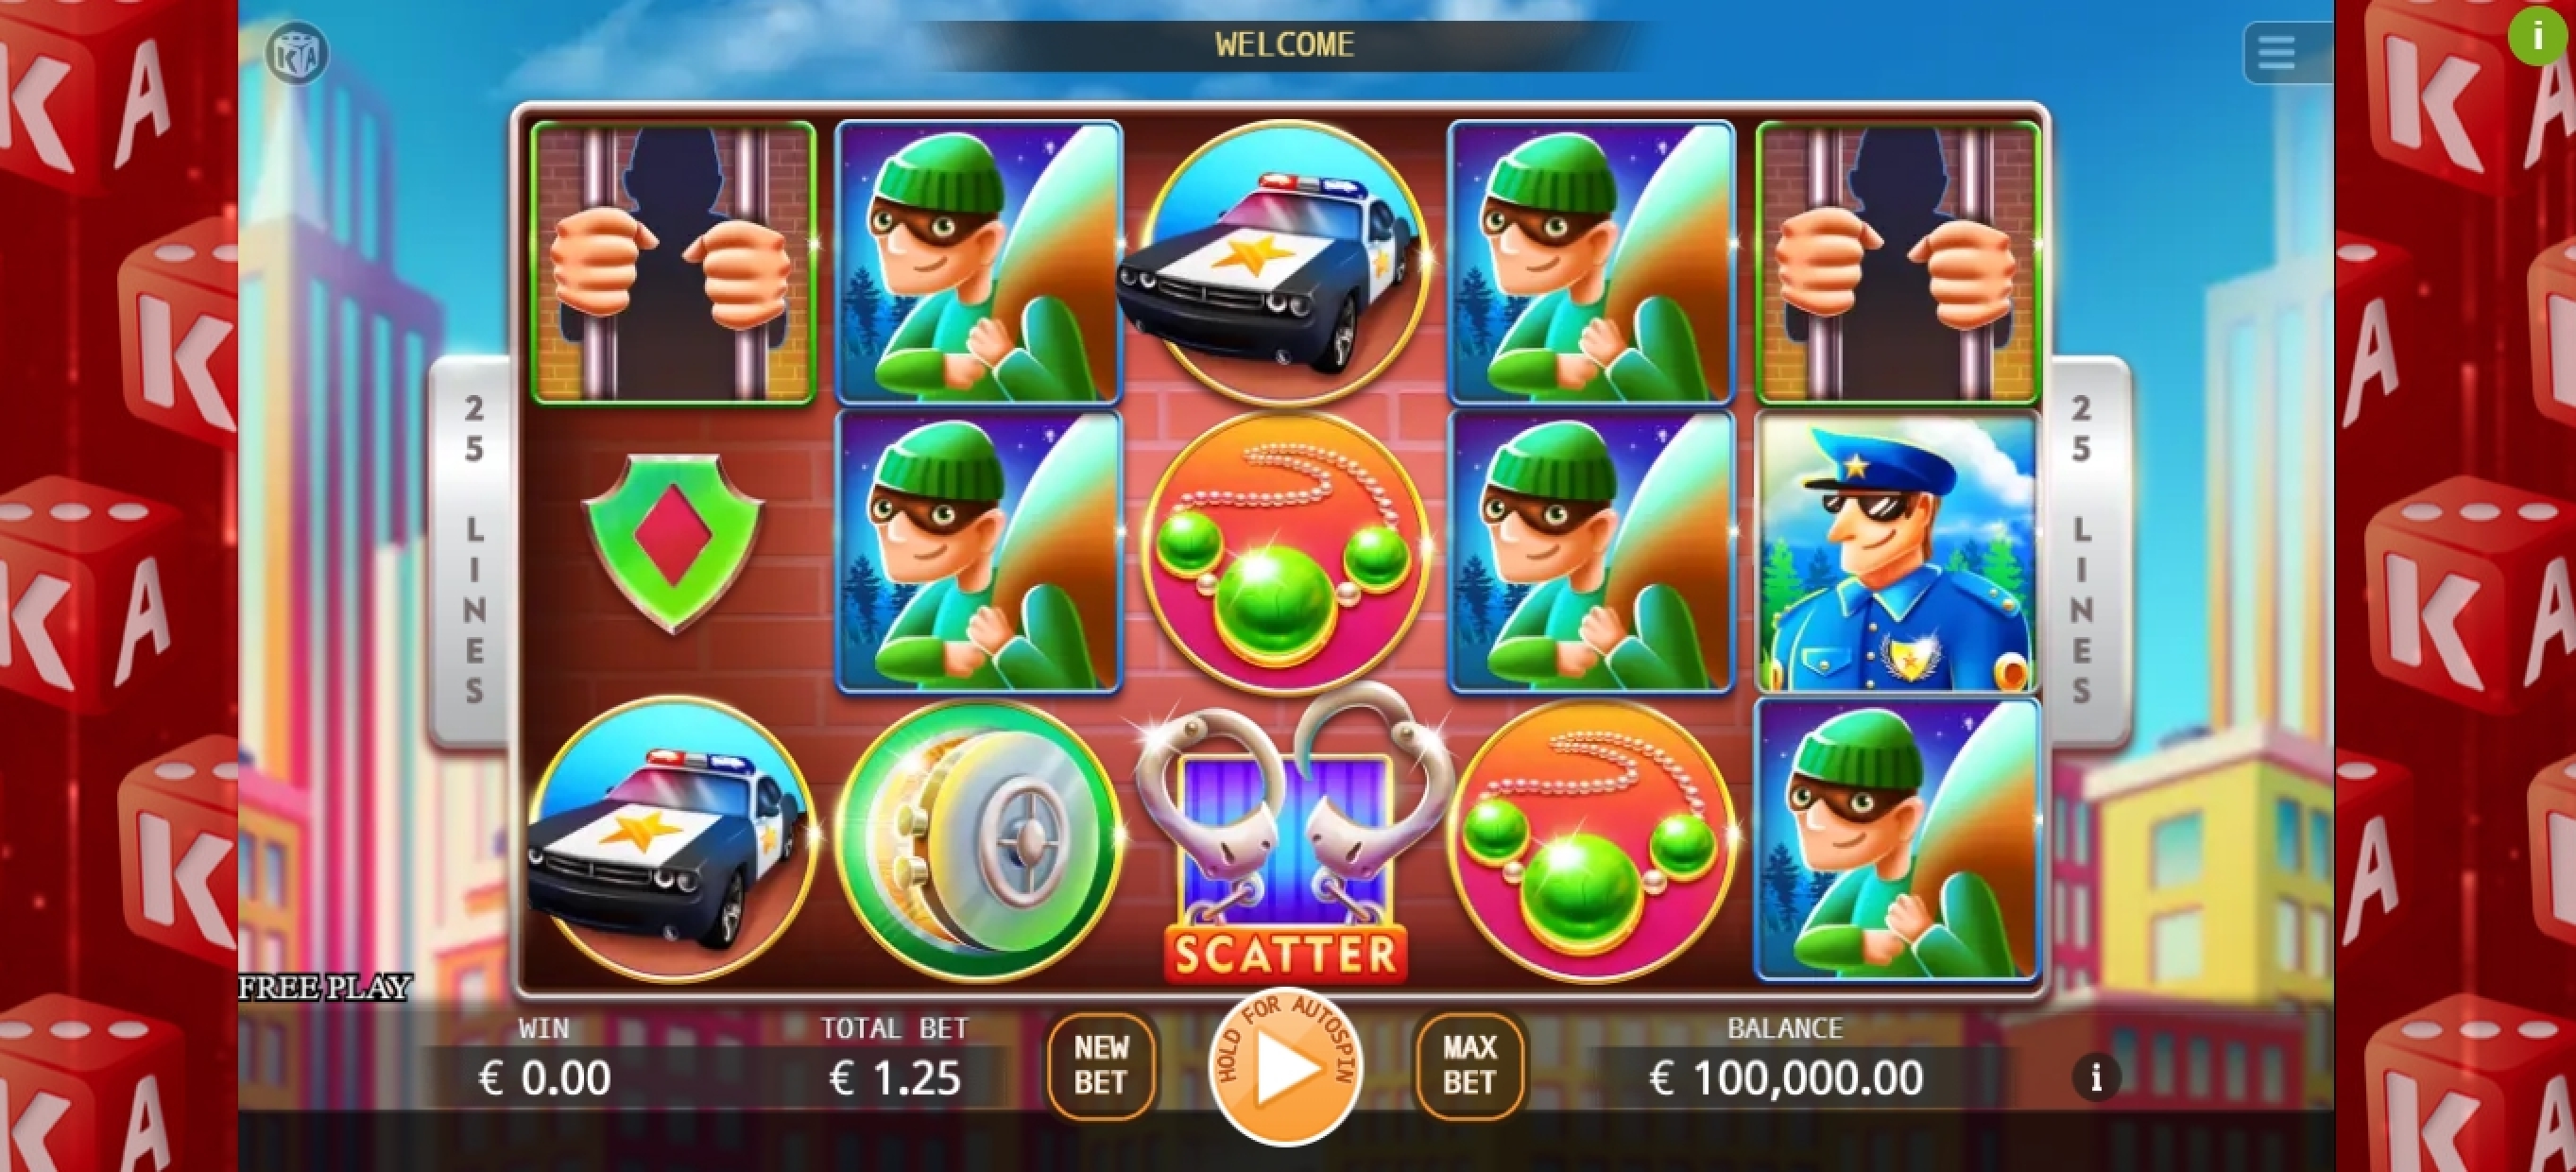 Reels in Catch the Thief Slot Game by KA Gaming